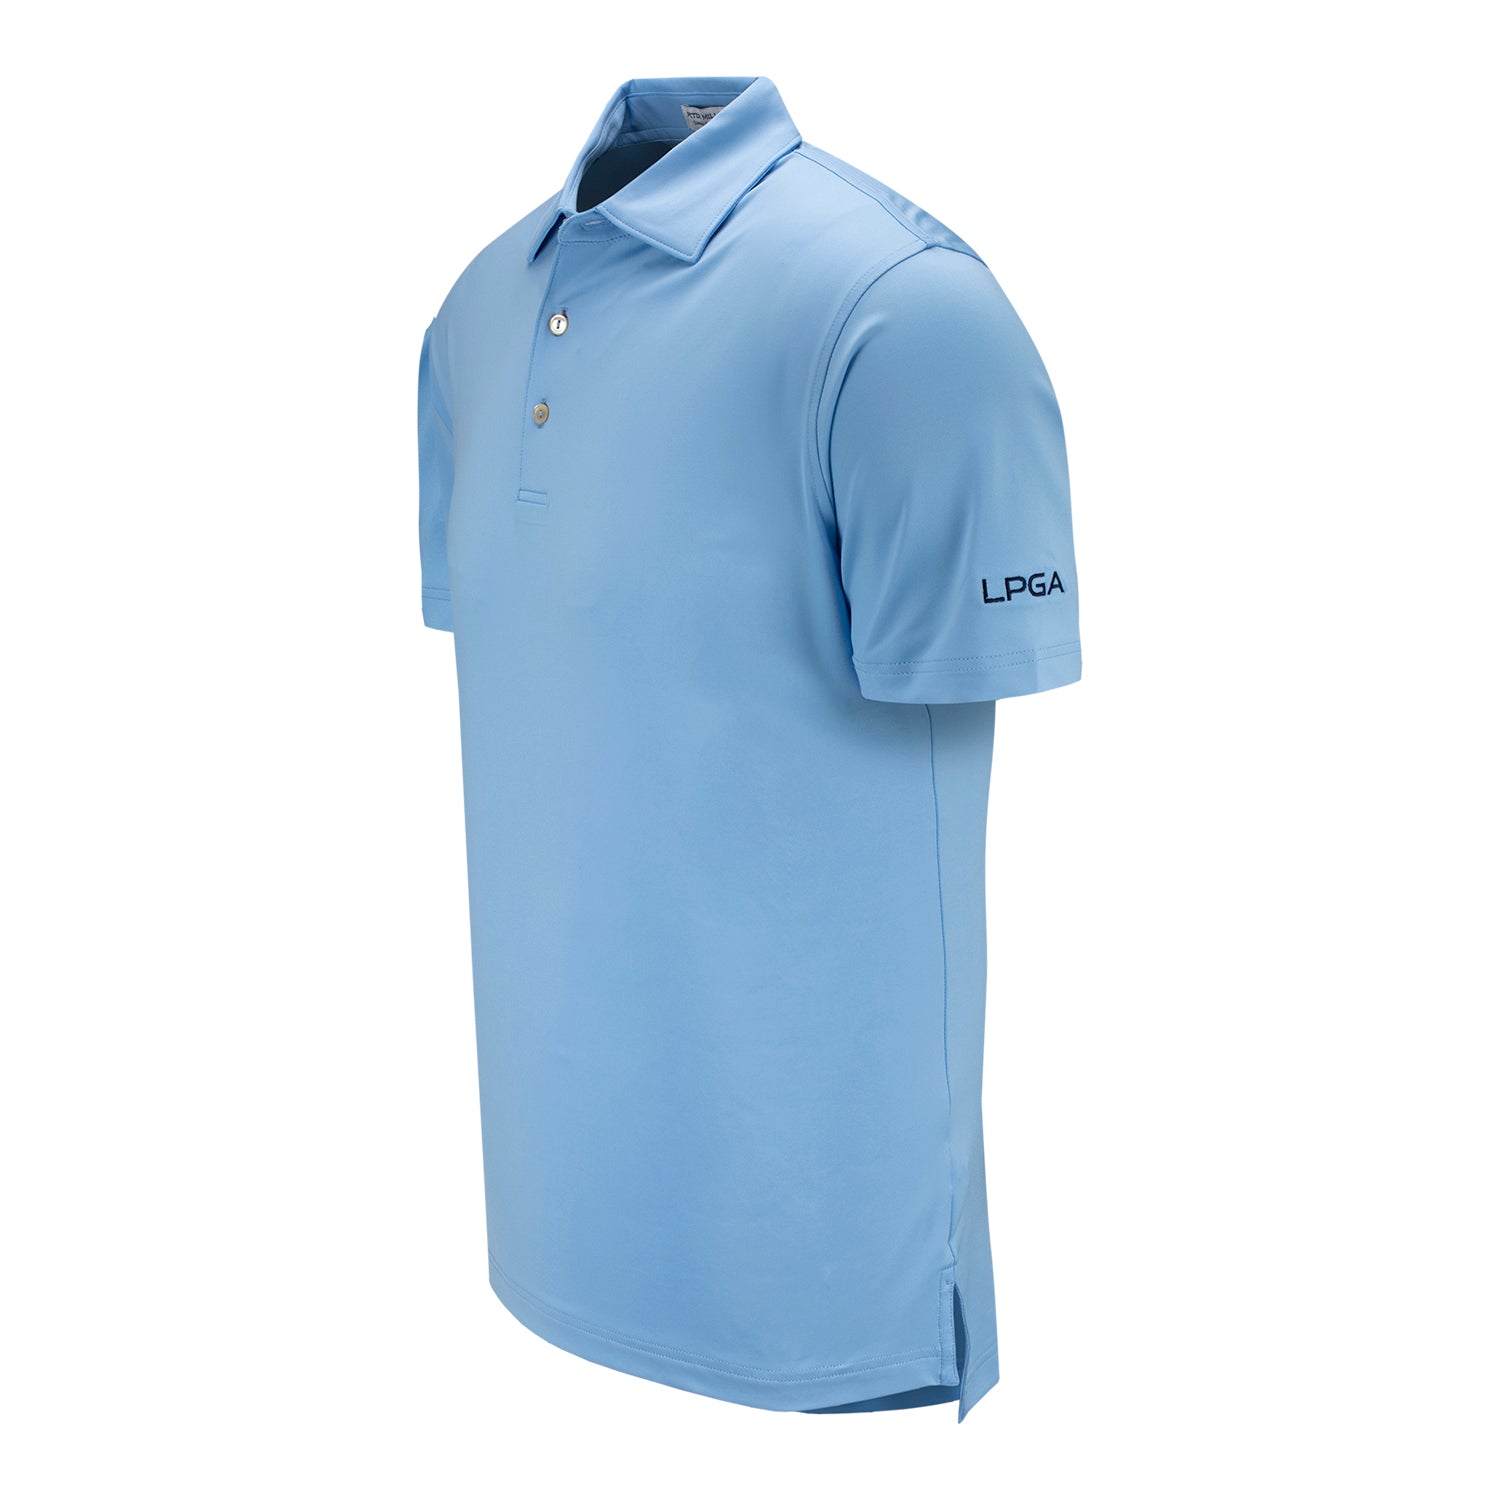 Peter Millar LPGA Men's Solid Jersey Polo - Angled Left Side View